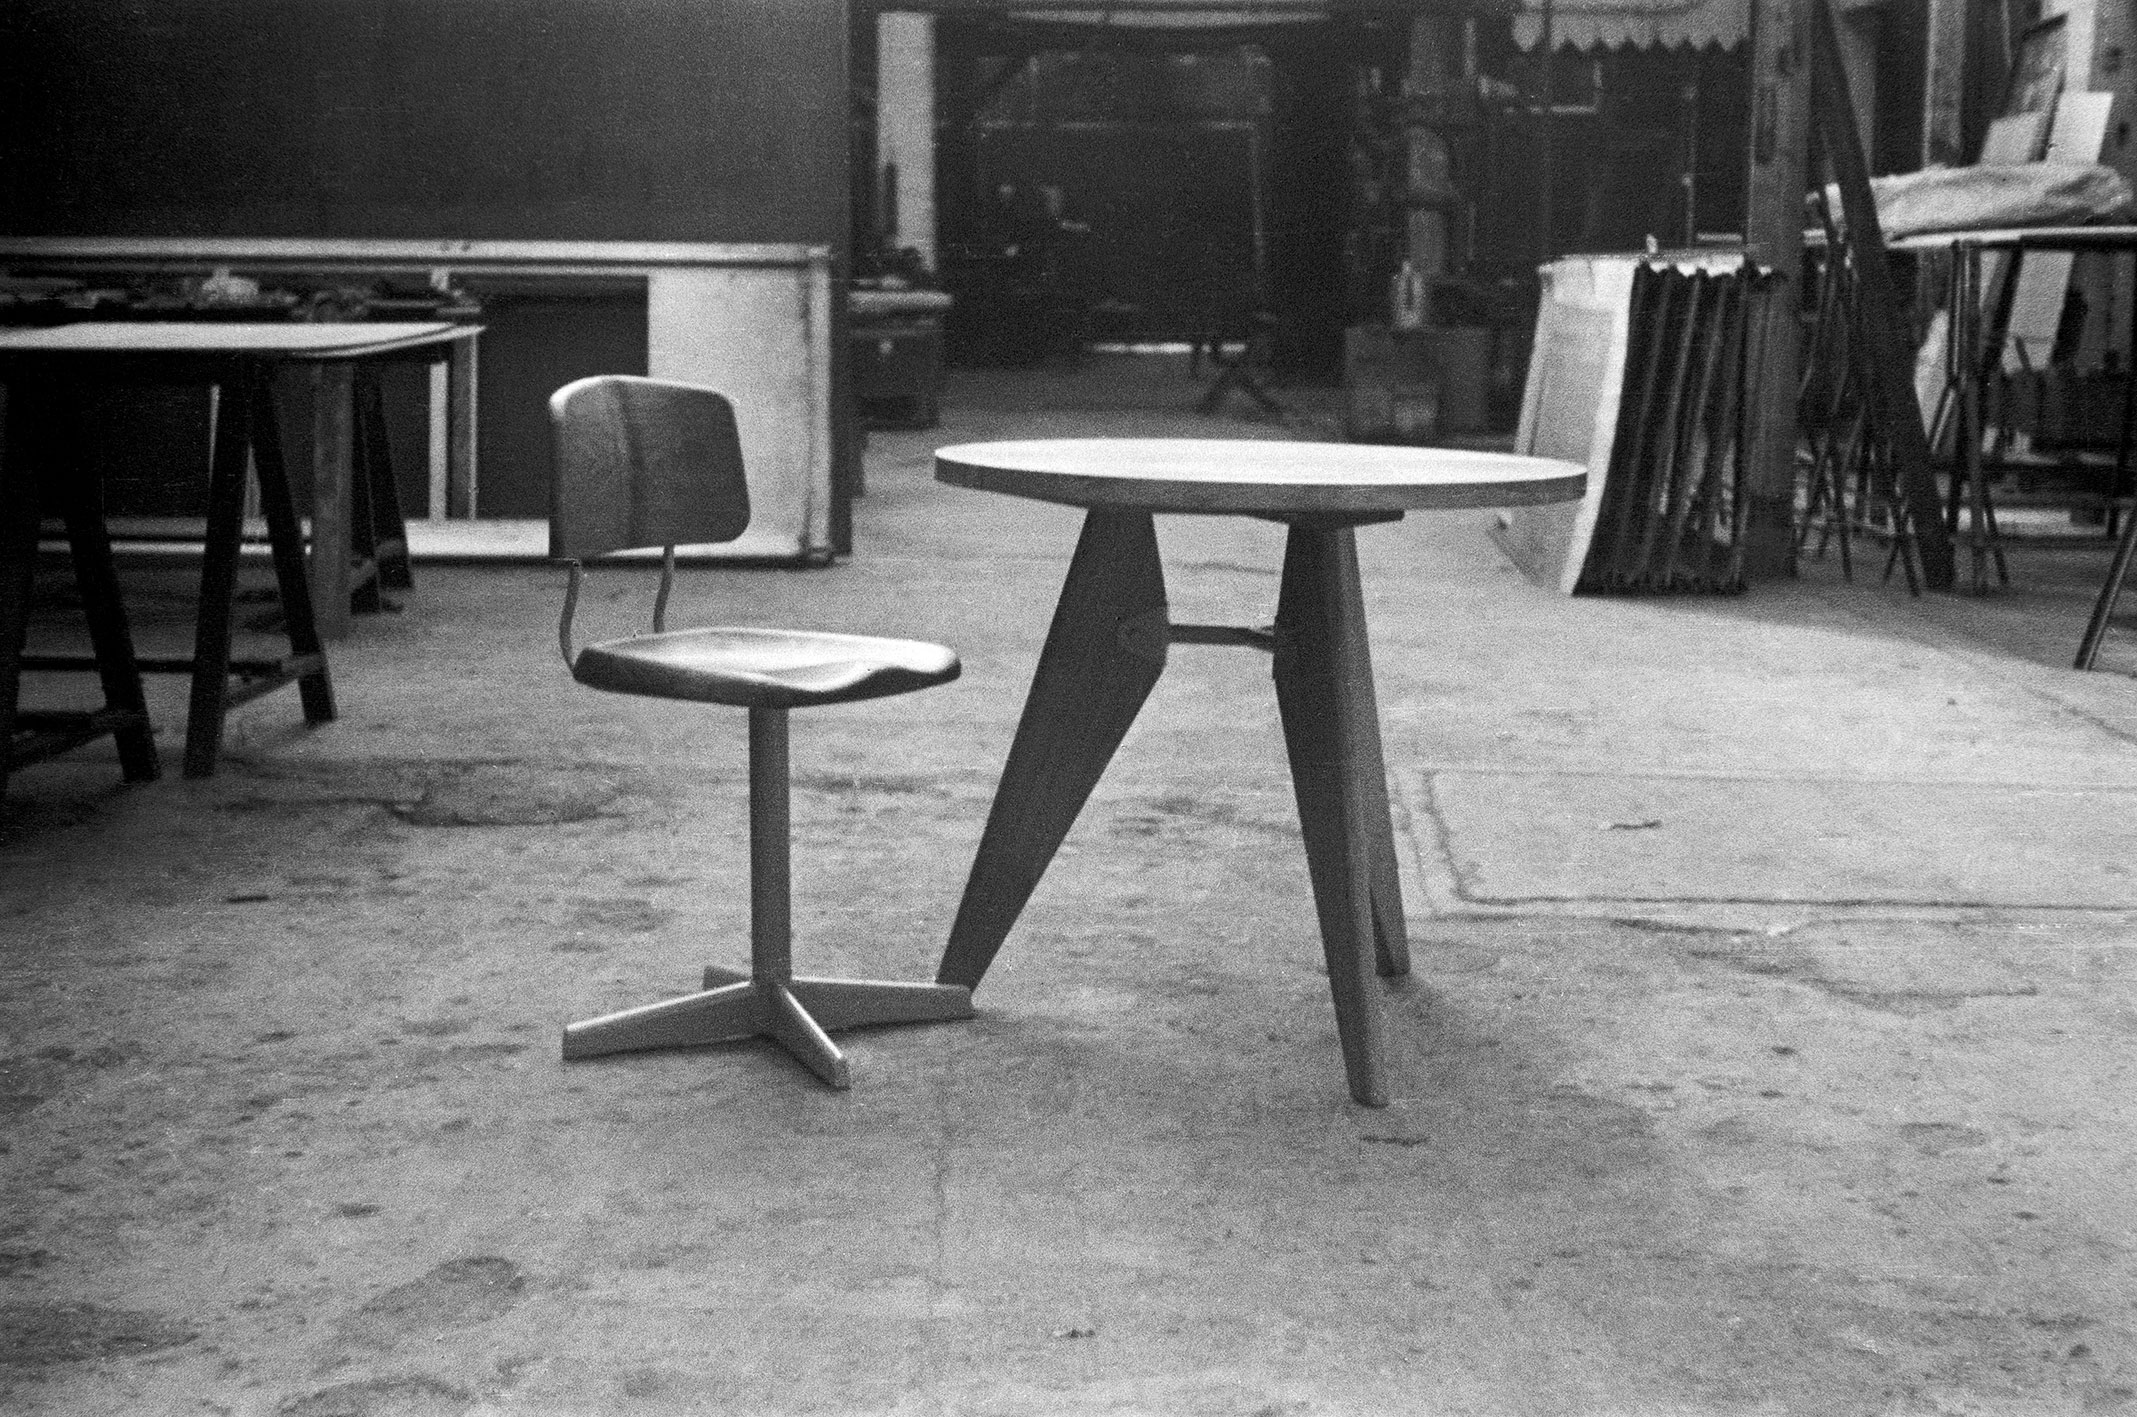 Dactylo chair CD 11 and Guéridon GH 11 in the workshop, ca. 1948.